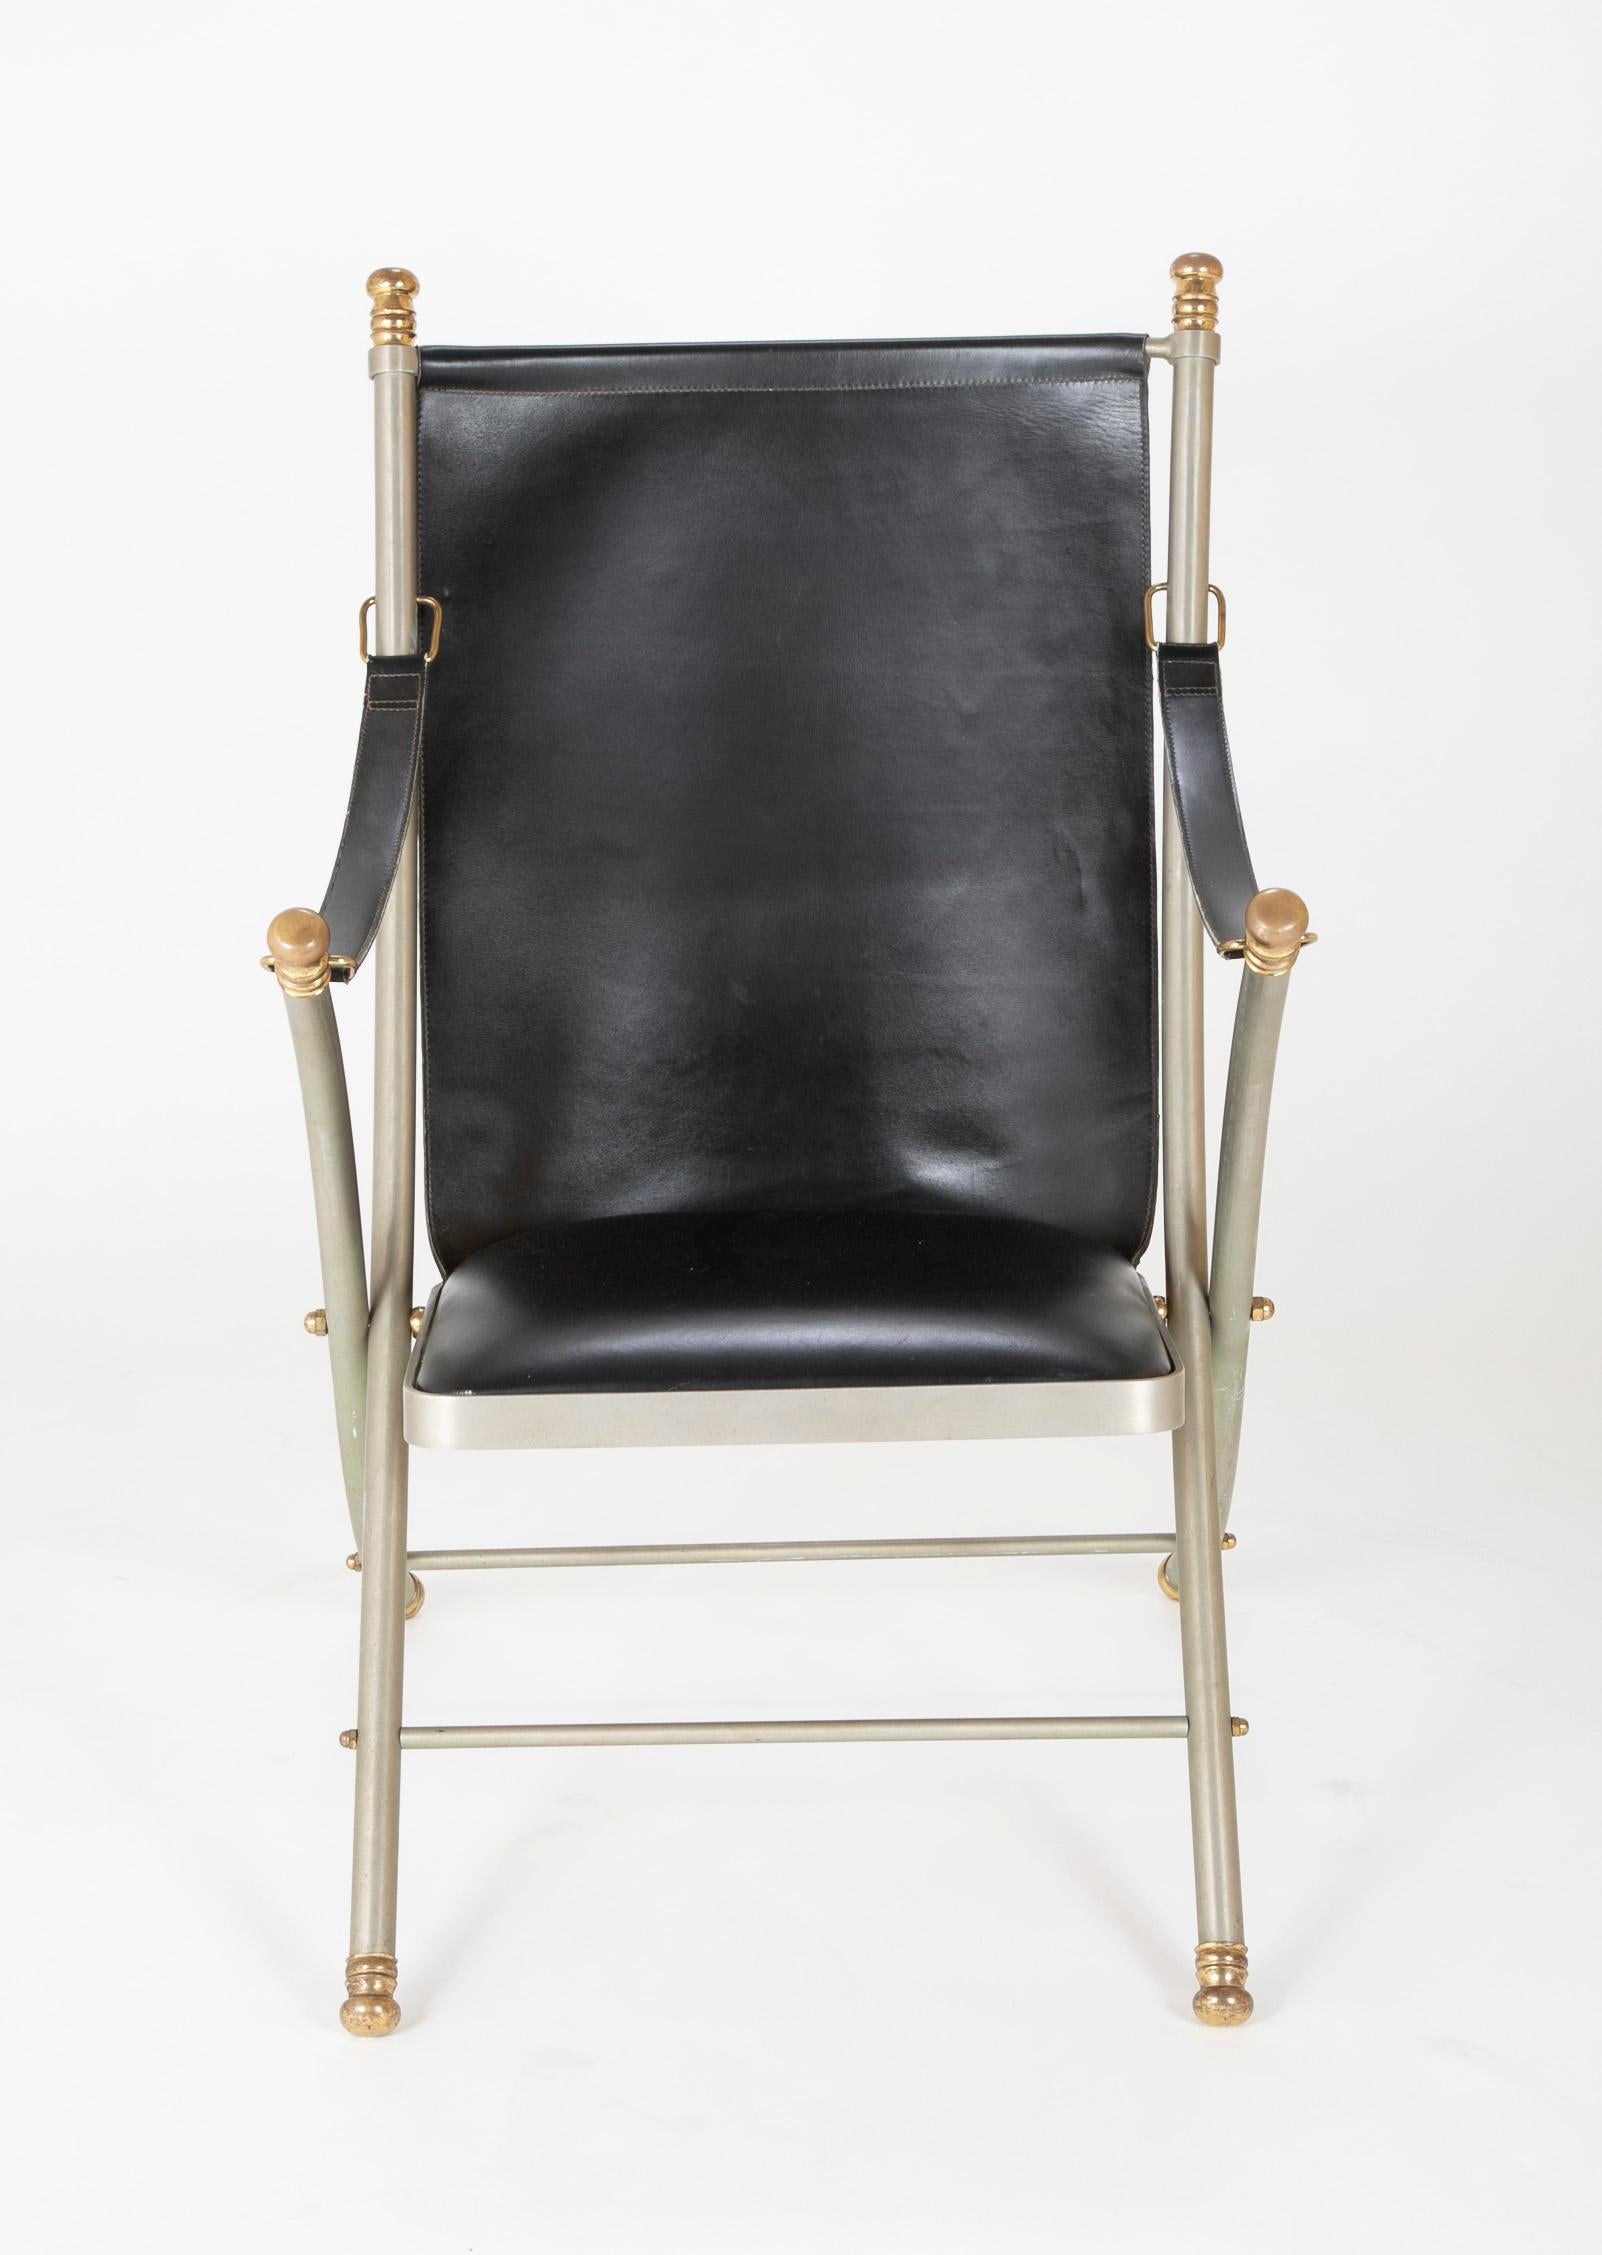 This is a rare model of a midcentury Maison Jansen campaign armchair. These chairs are typically made with paw feet, this example is unusual in that the knob feet match the finials on top, a thoroughly modern touch, possibly a custom order. Entirely